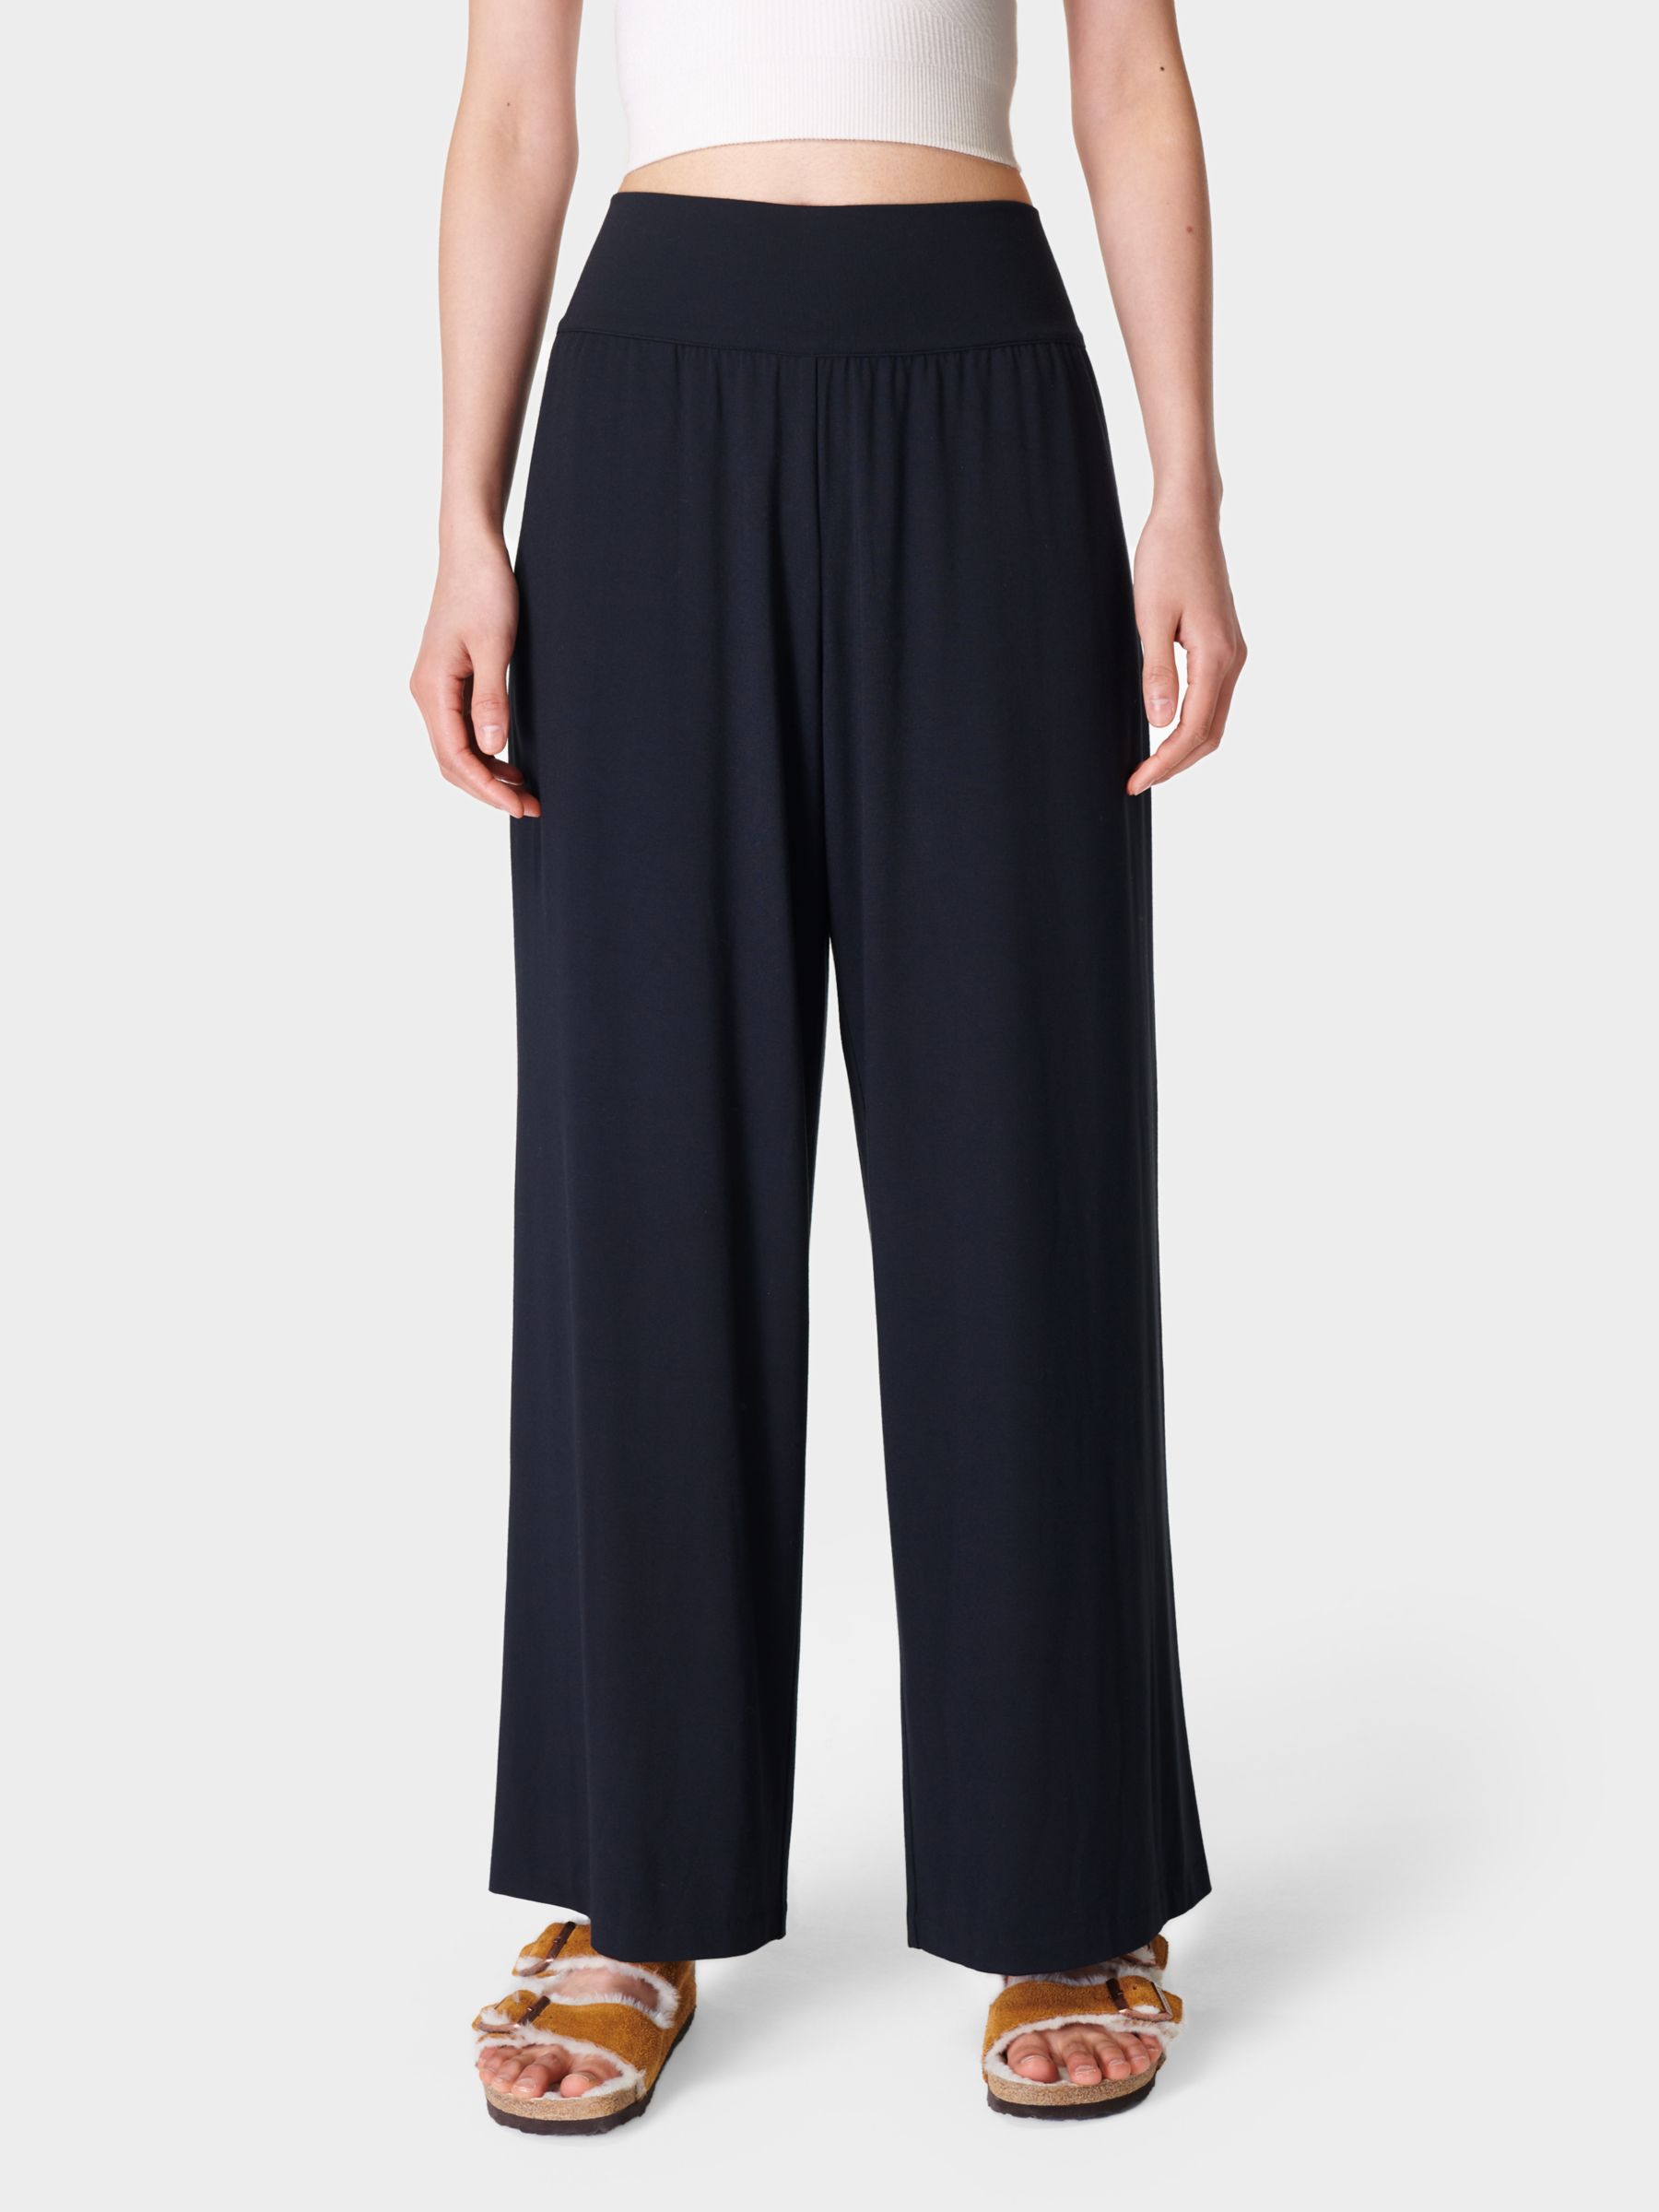 Shop Sweaty Betty Women's Cropped Trousers up to 50% Off